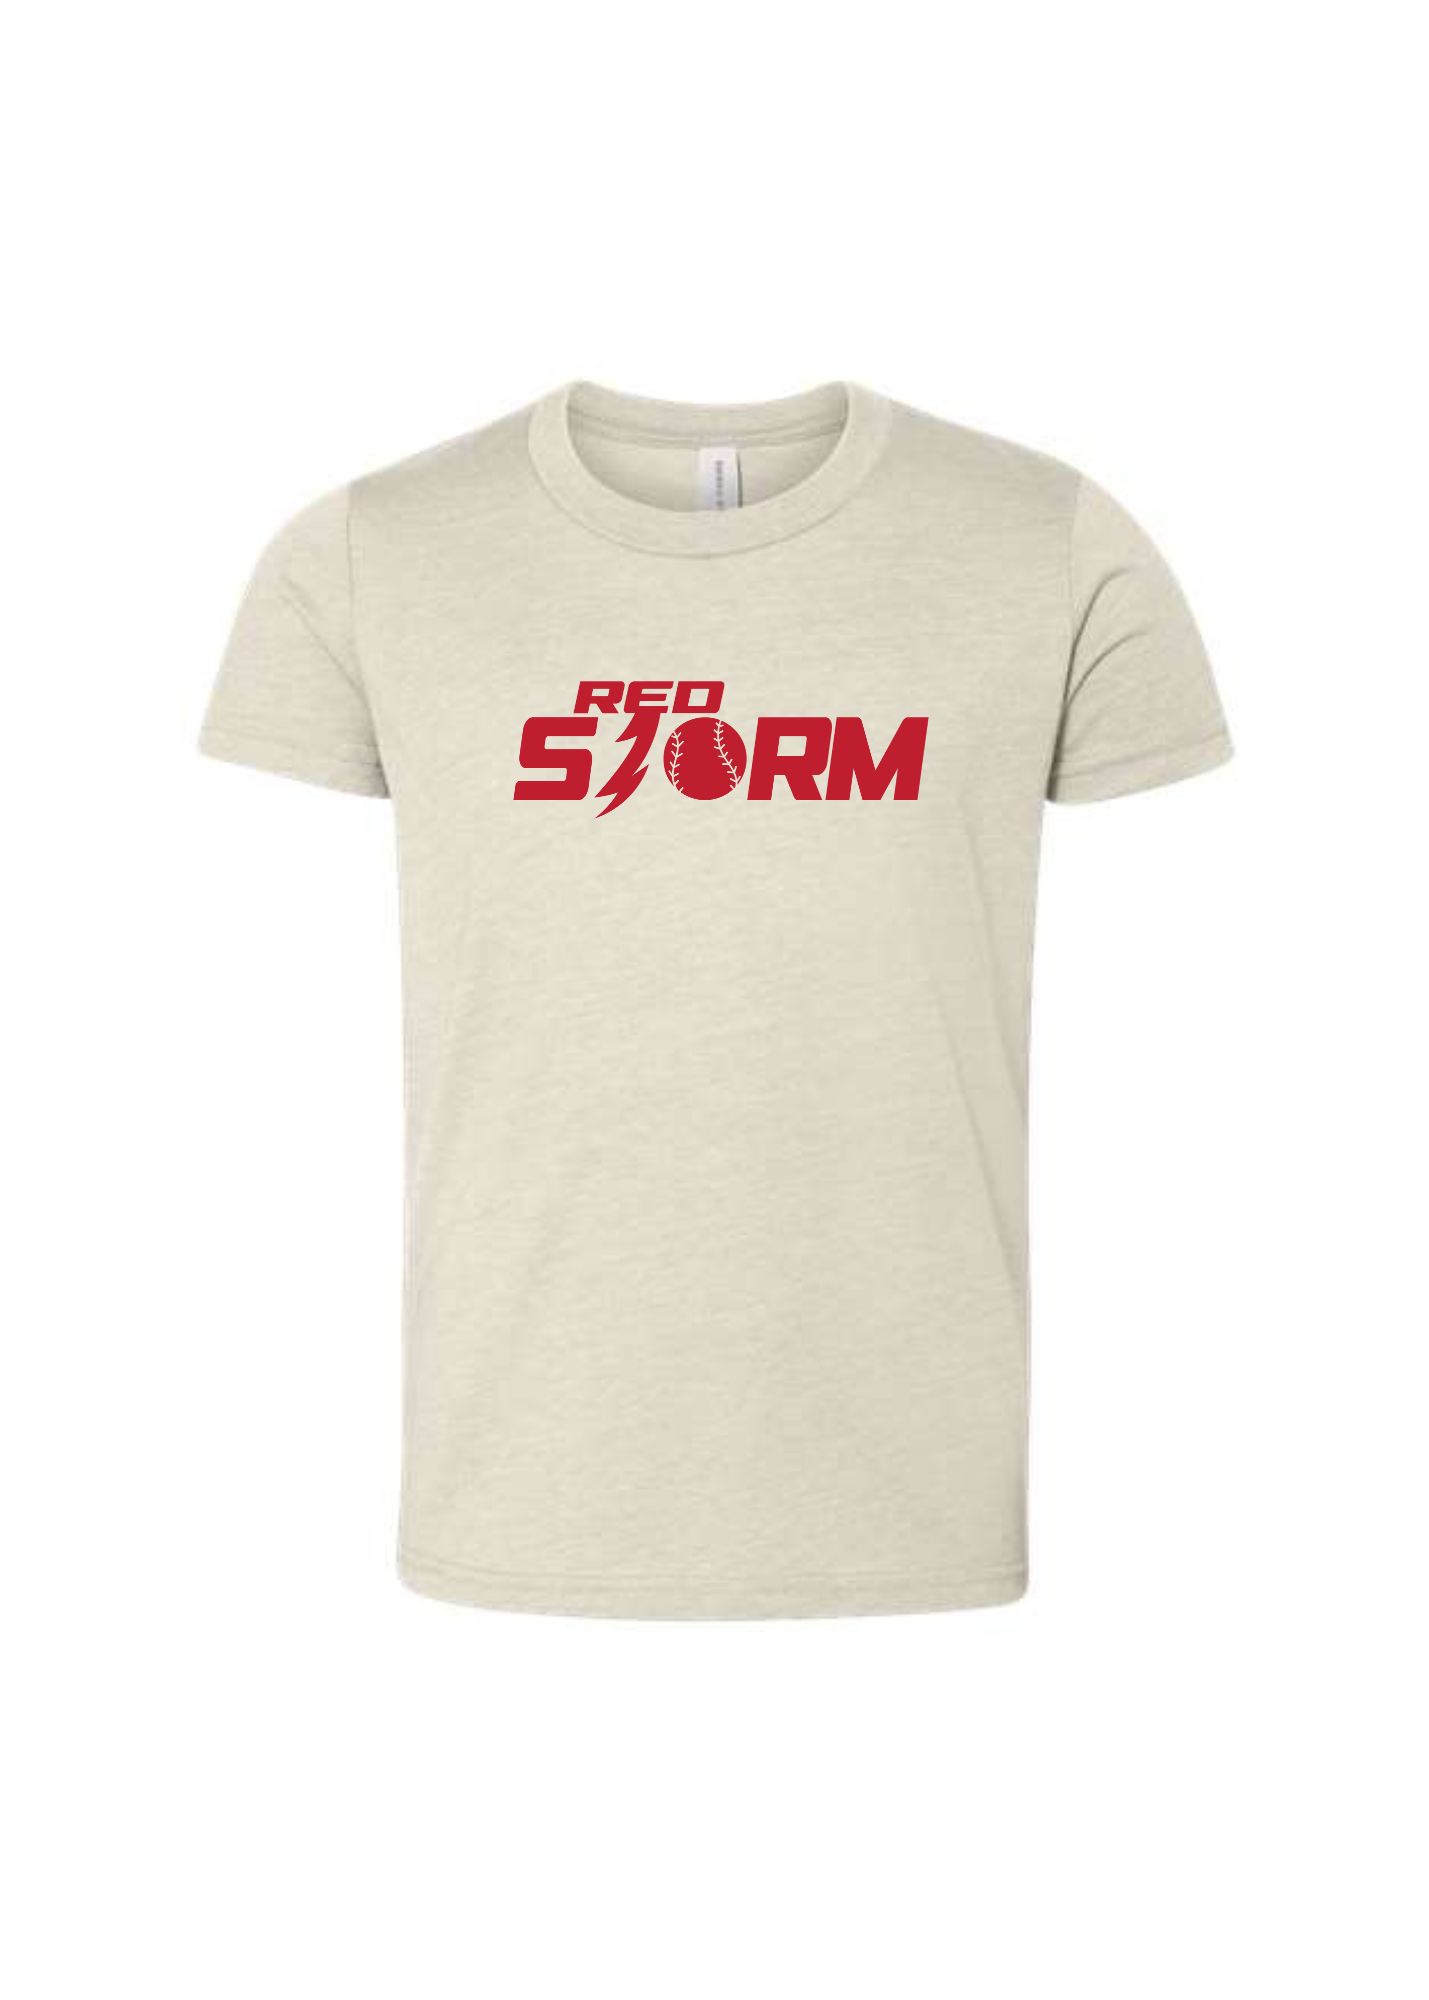 Red Storm | Youth Tee-Sister Shirts-Sister Shirts, Cute & Custom Tees for Mama & Littles in Trussville, Alabama.